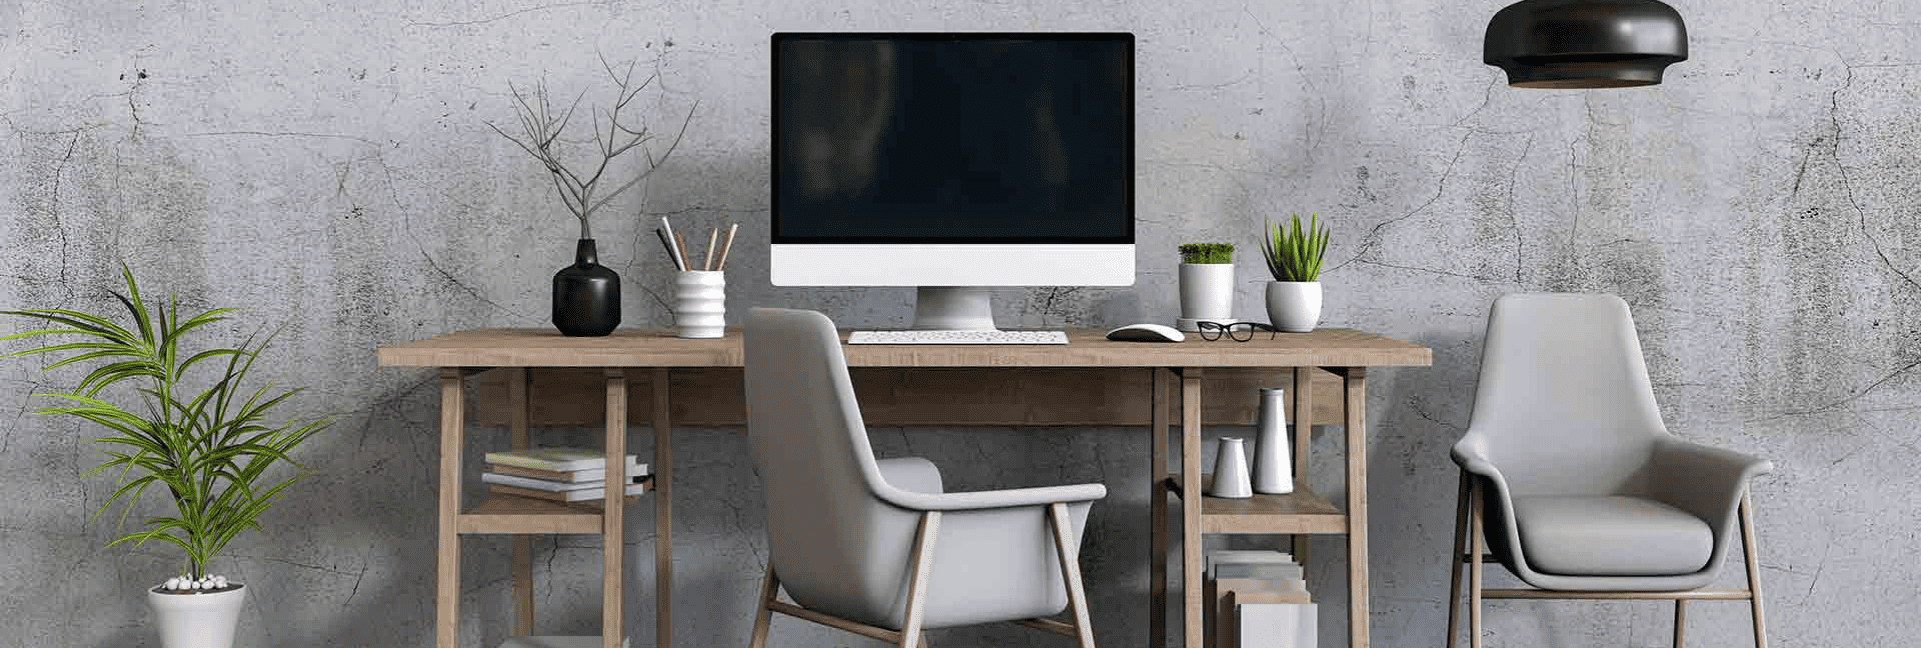 Home Office Setups For Productivity And Comfort - Comwave